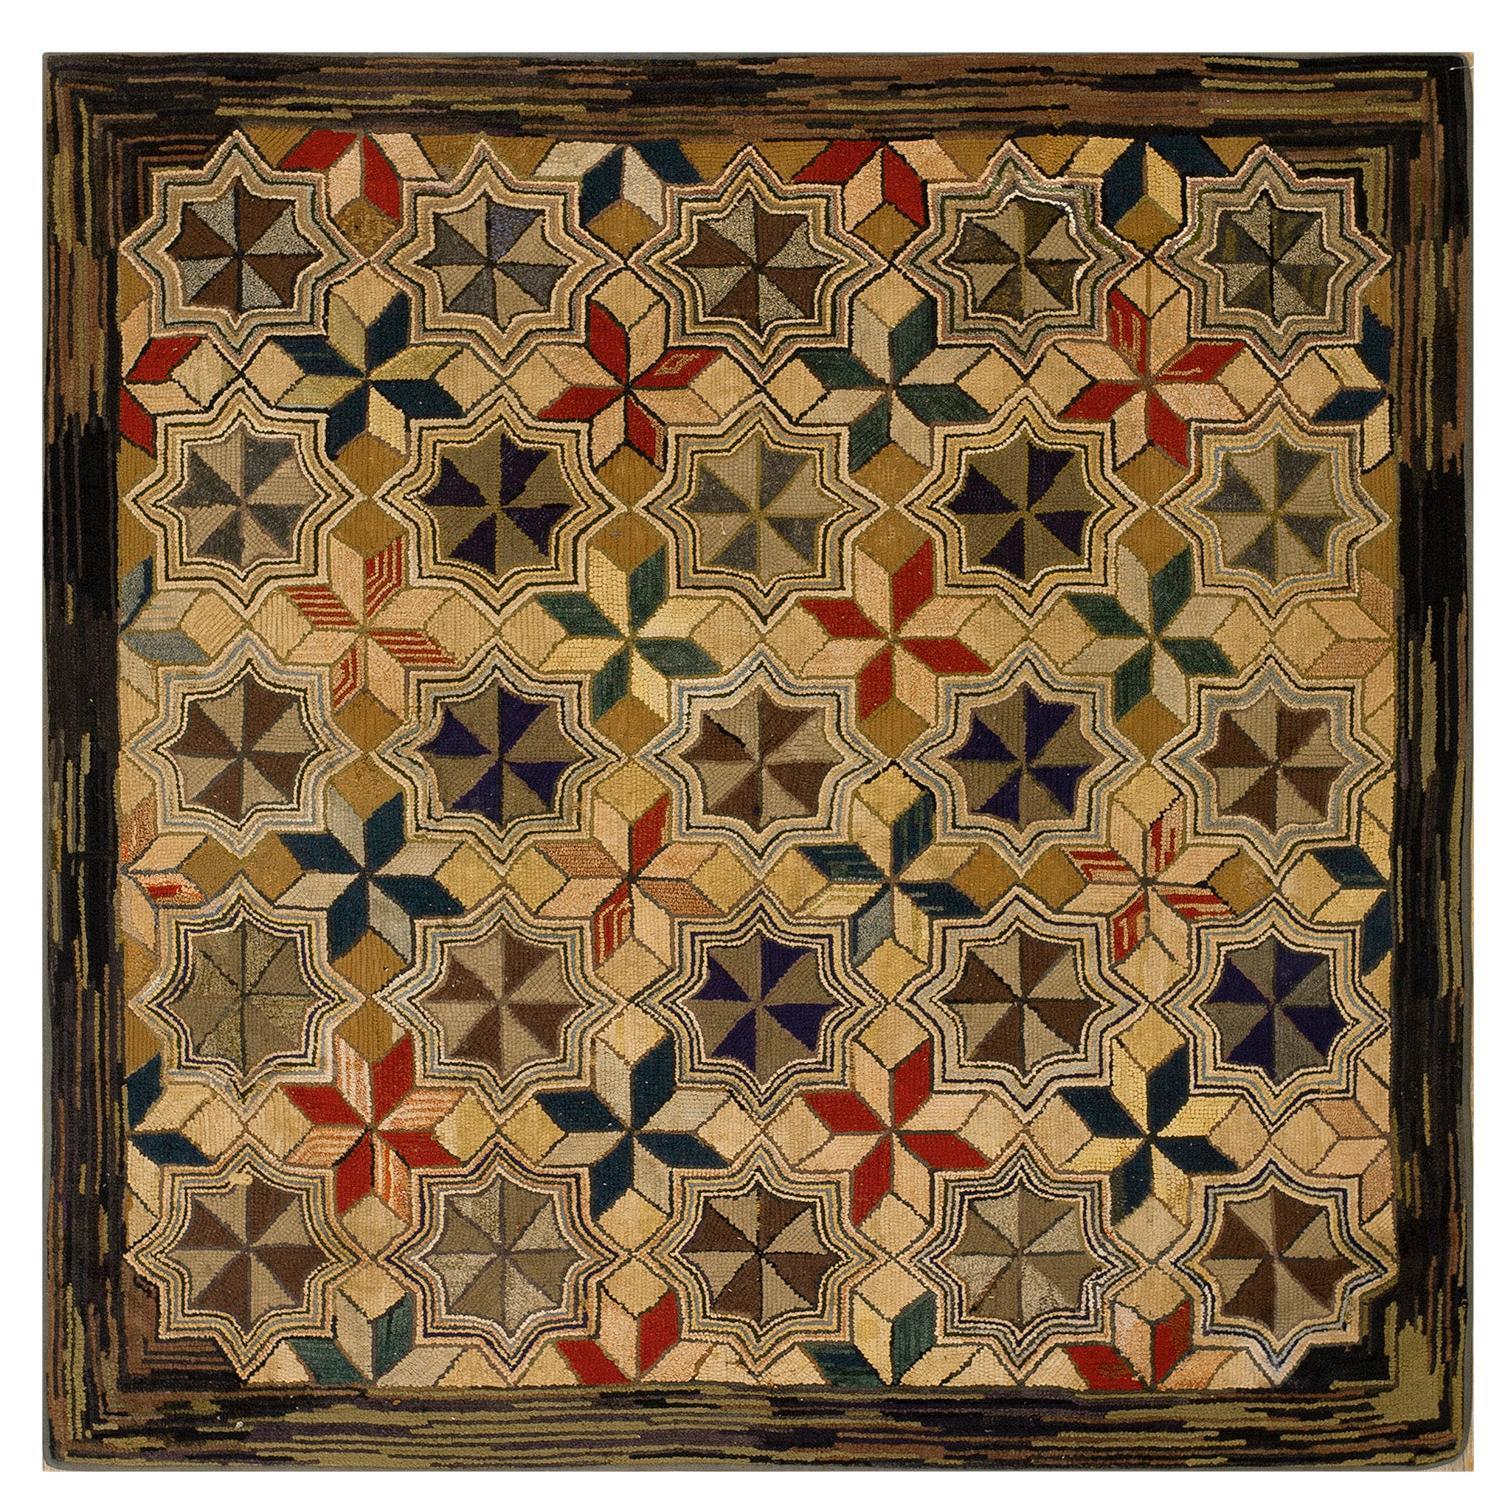 Early 20th Century American Hooked Rug ( 5' 9'' x 6'  - 175 x 182 cm ) For Sale